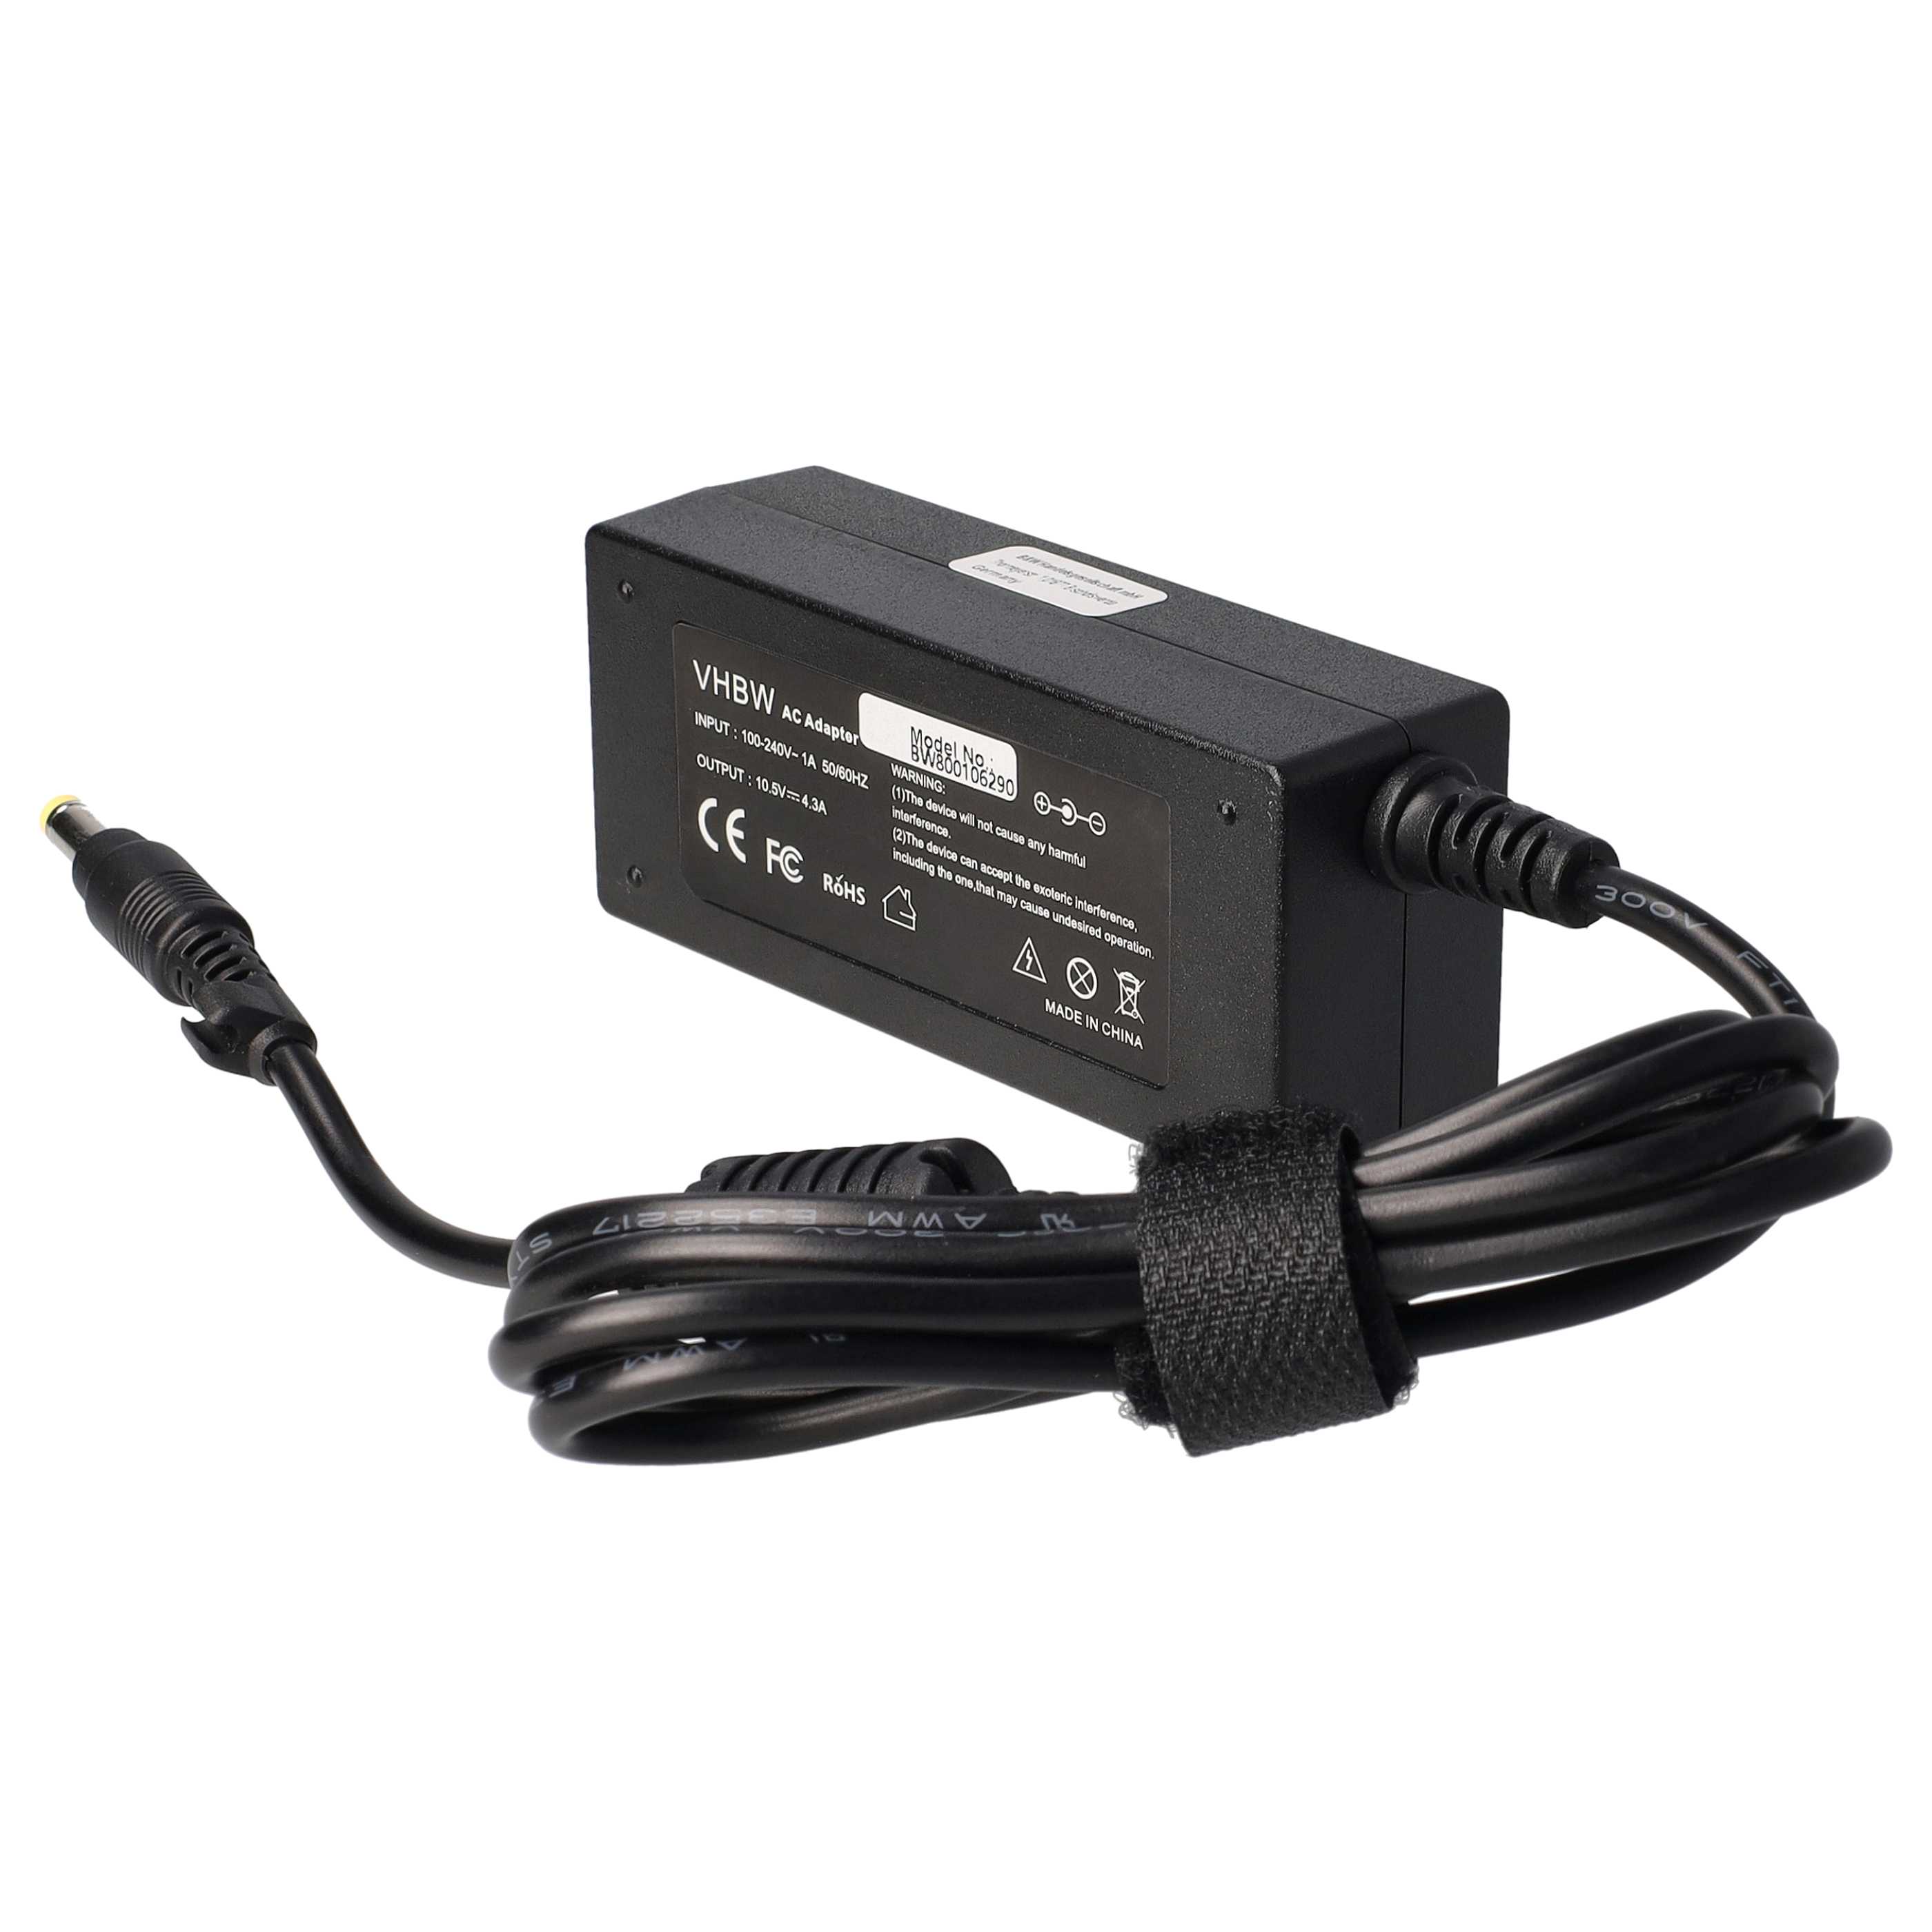 Mains Power Adapter replaces Sony ADP-30KH B for SonyNotebook, 45 W